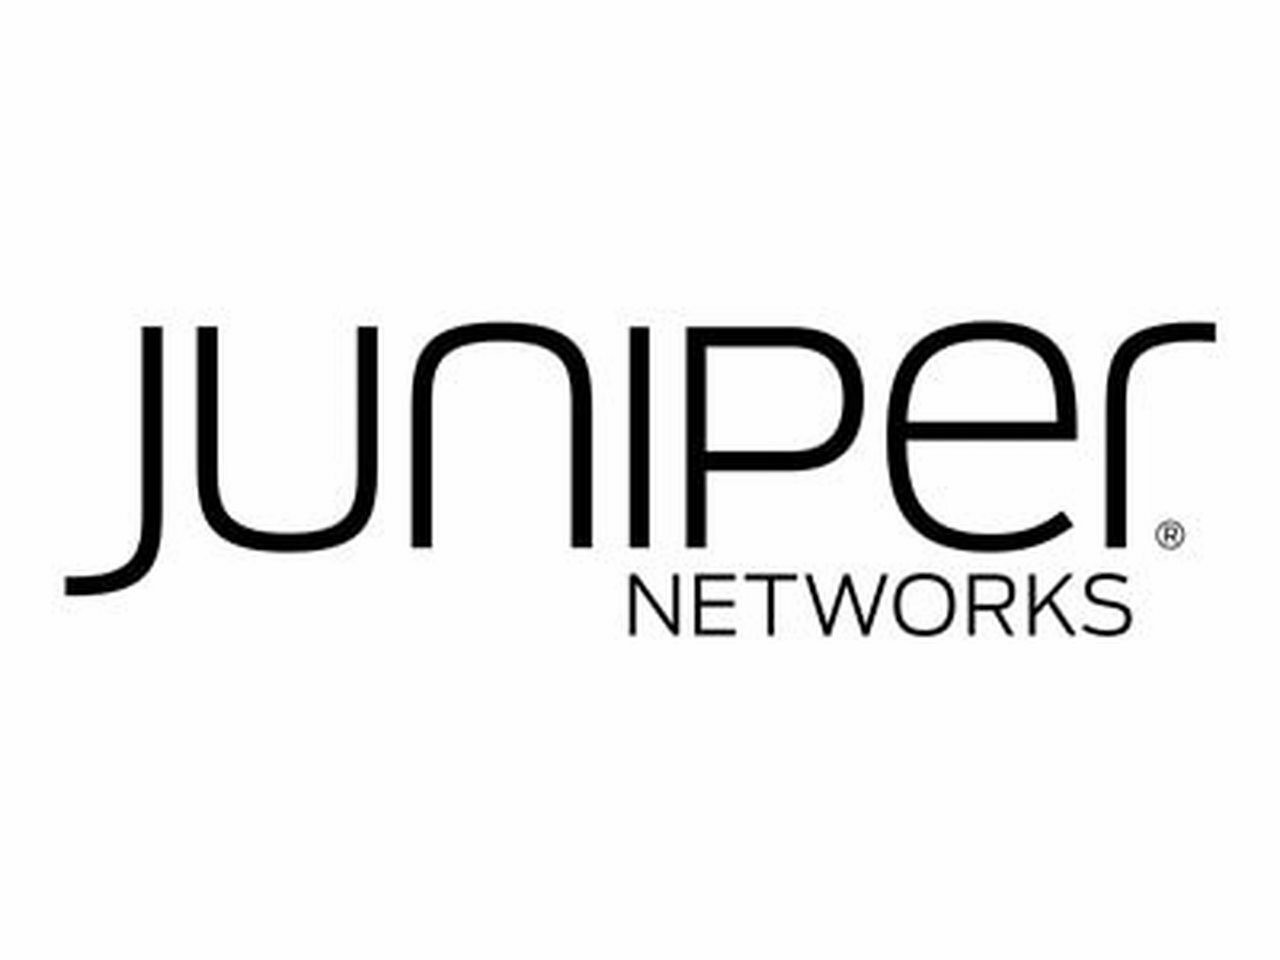 Juniper Care Next Day Onsite Support for OCX1100-48SX, AC/DC, AFI/AFO, Promotion Price above 1000 units, NON-DISCOUNTABLE